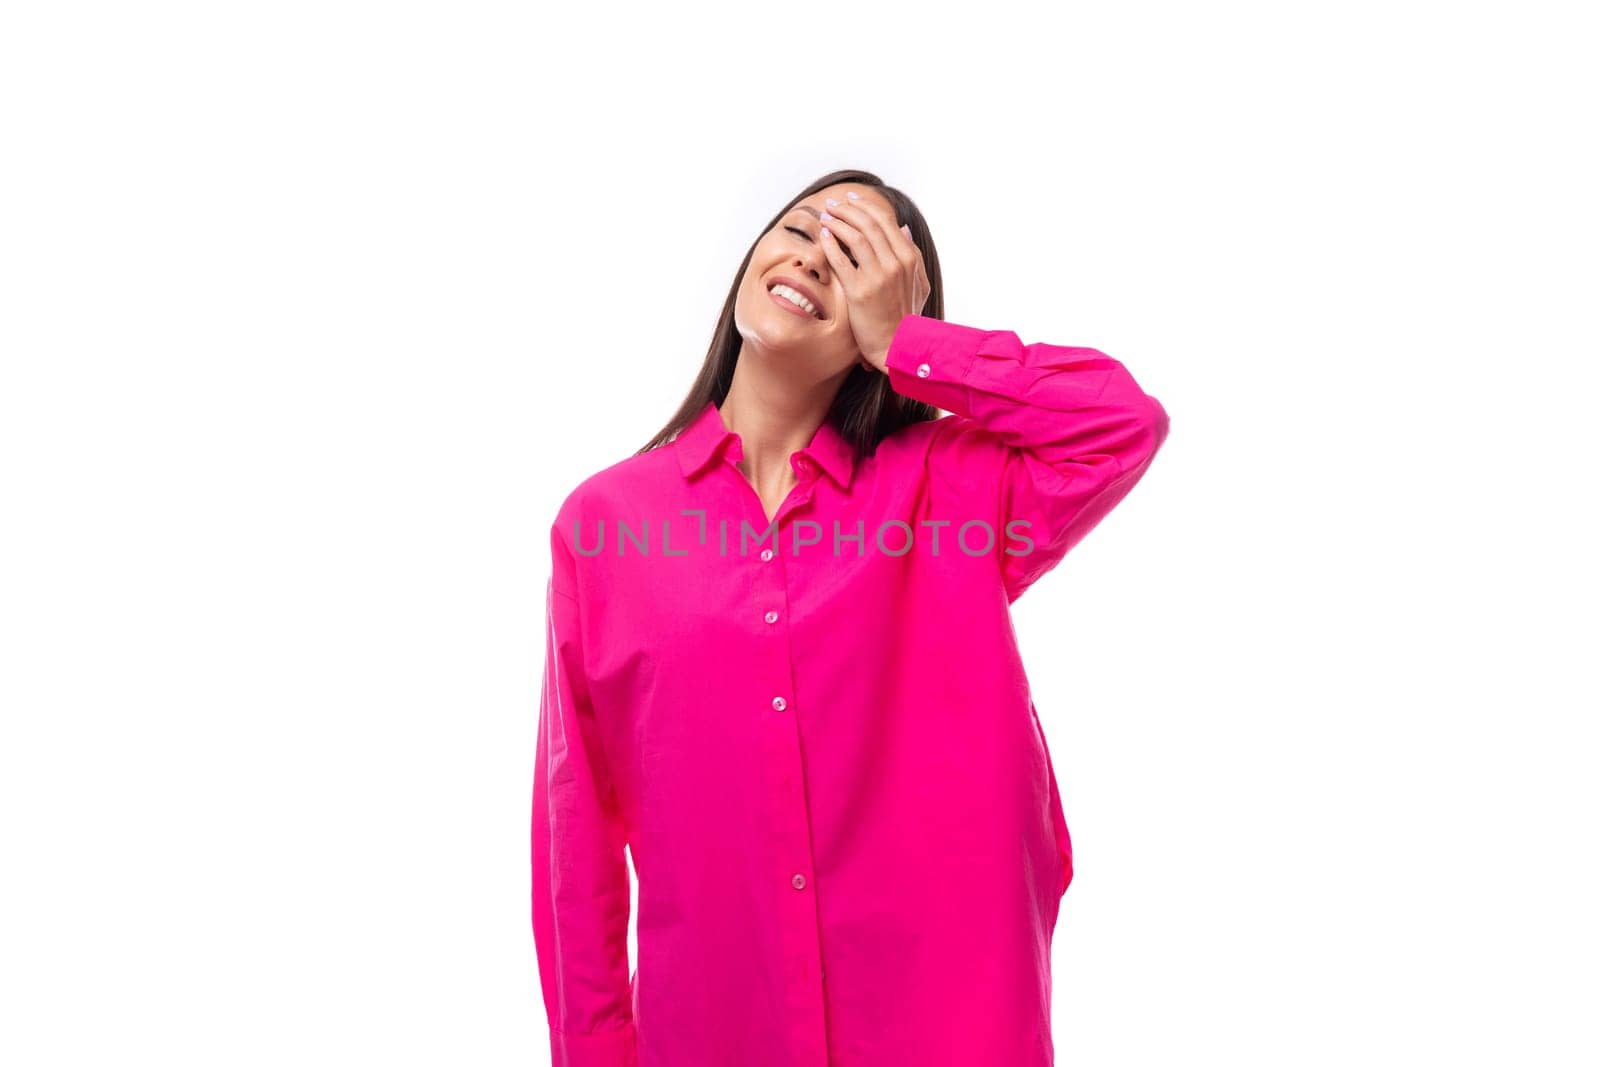 happy positive young brunette lady dressed in a bright pink shirt on a white background.